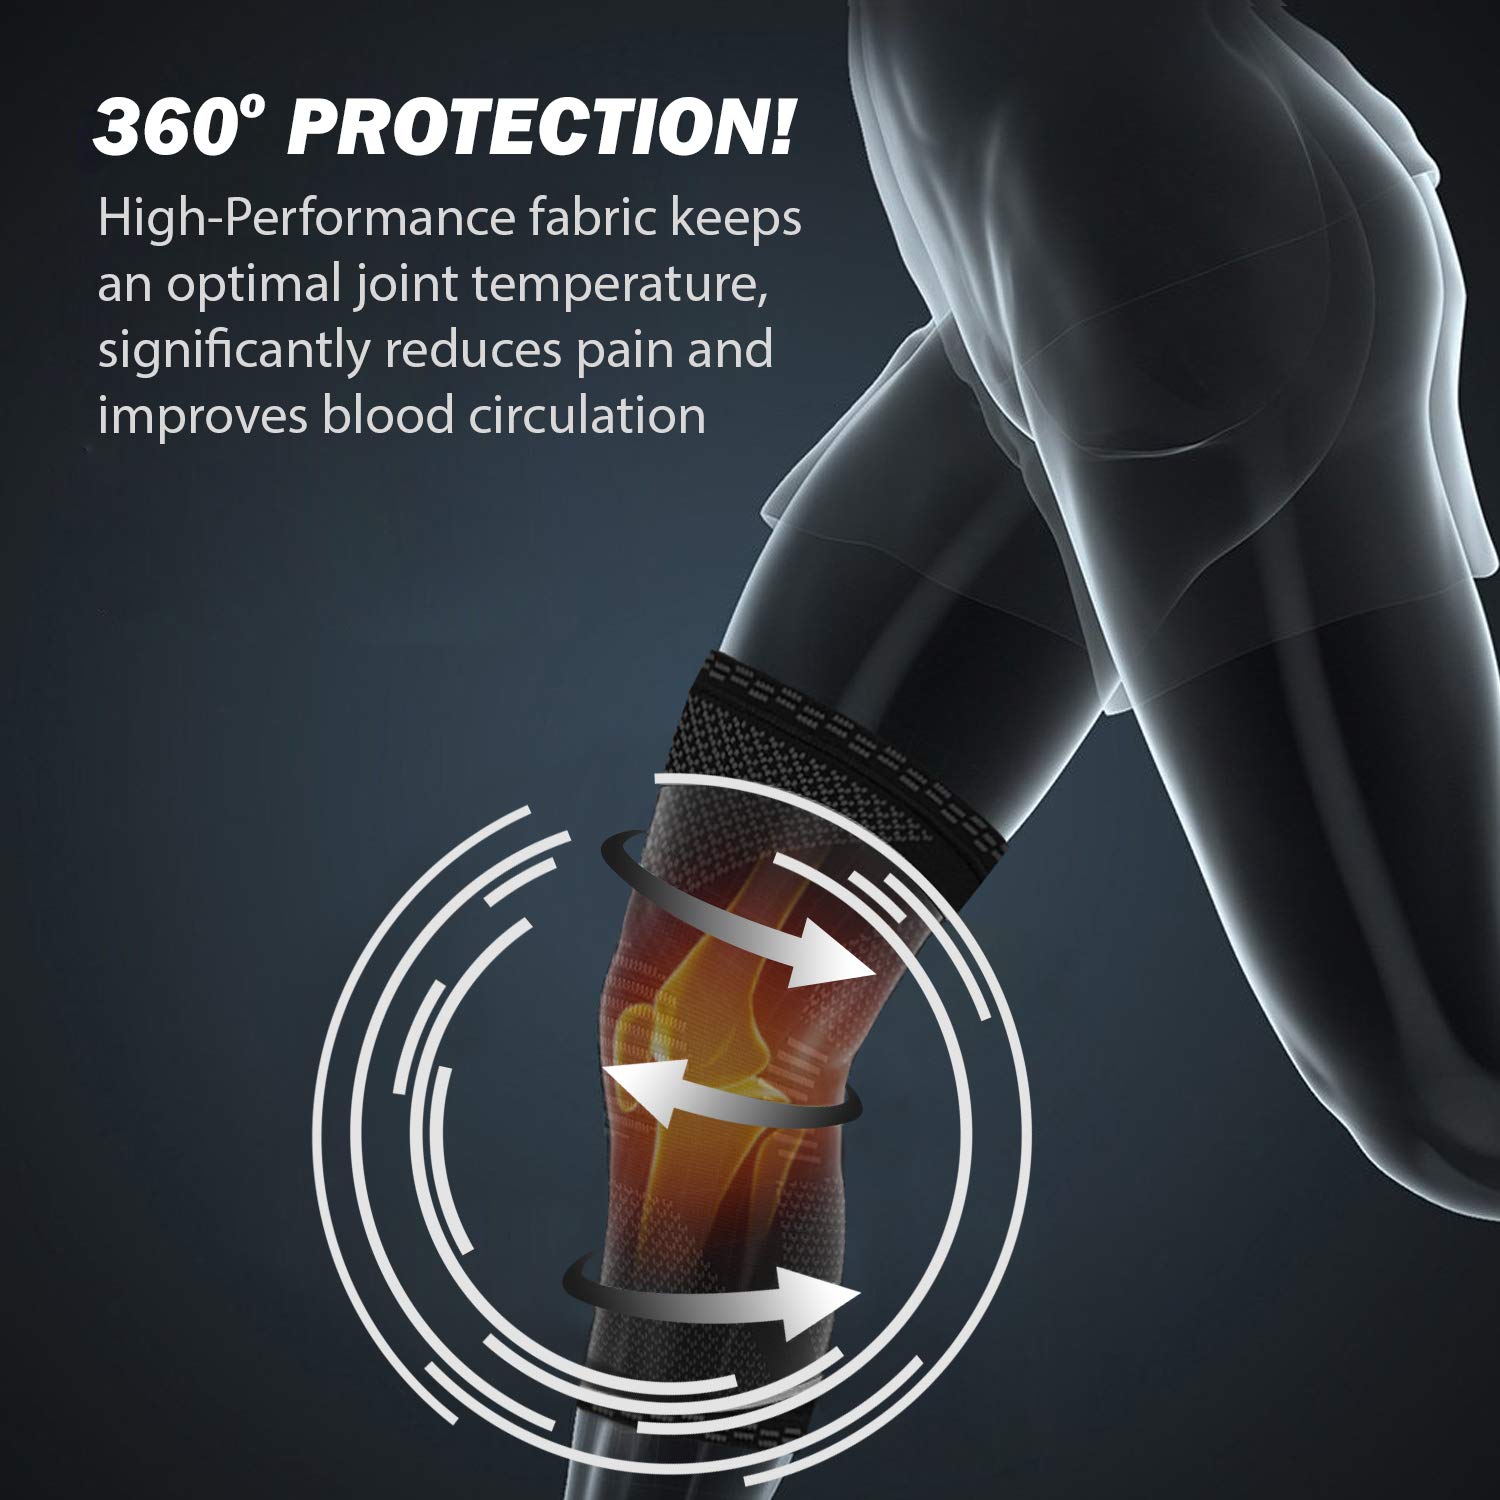 360° knee protection